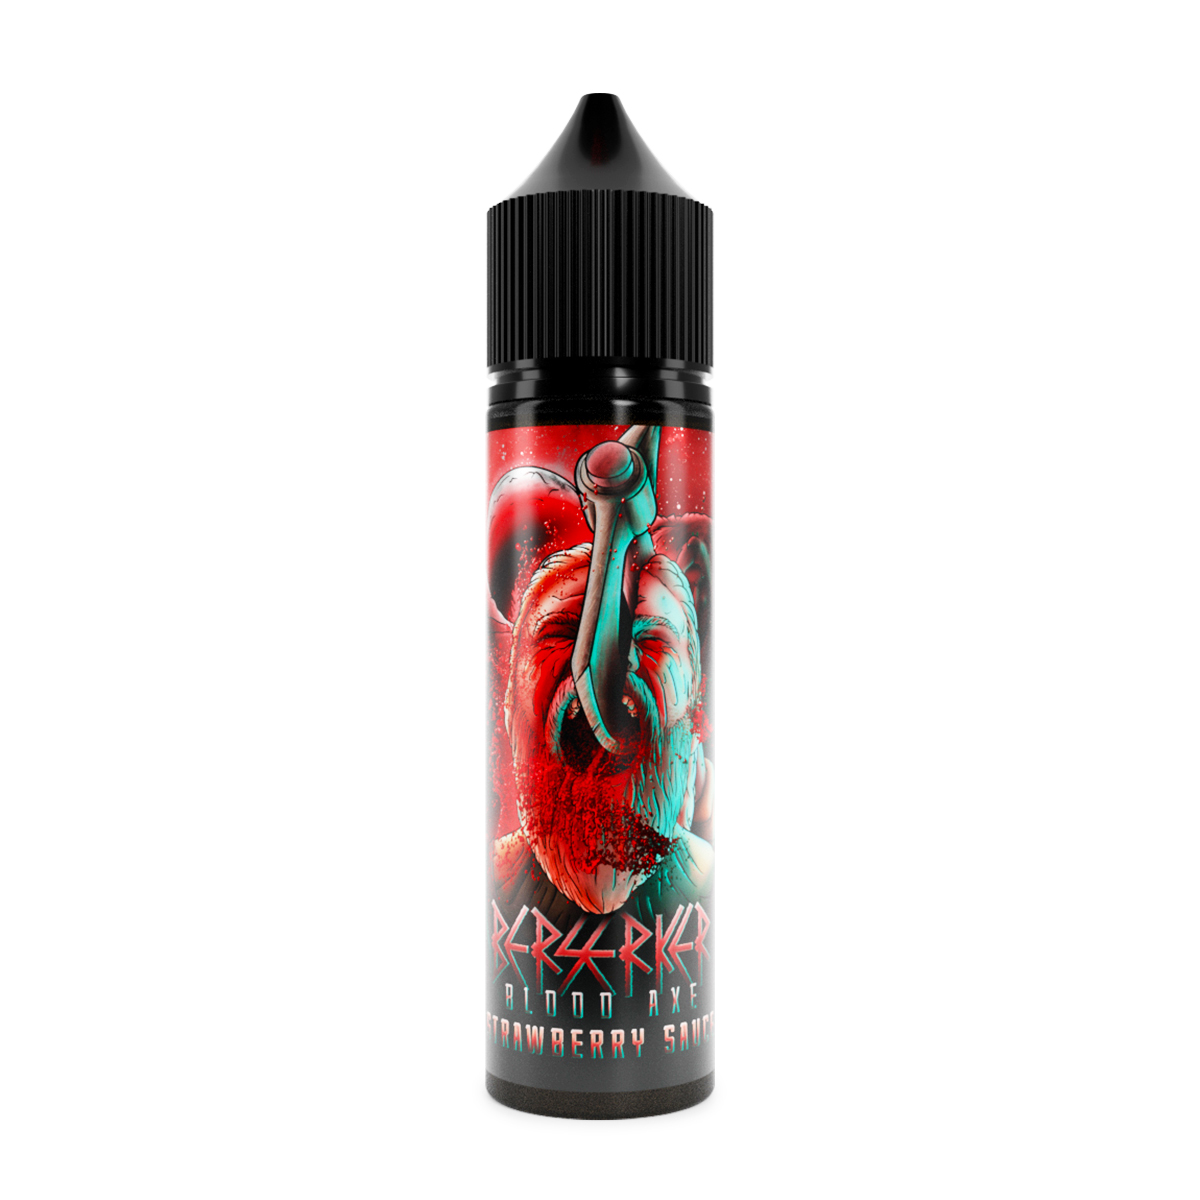 Berserker Strawberry Sauce Flavour Concentrate by Joe's Juice